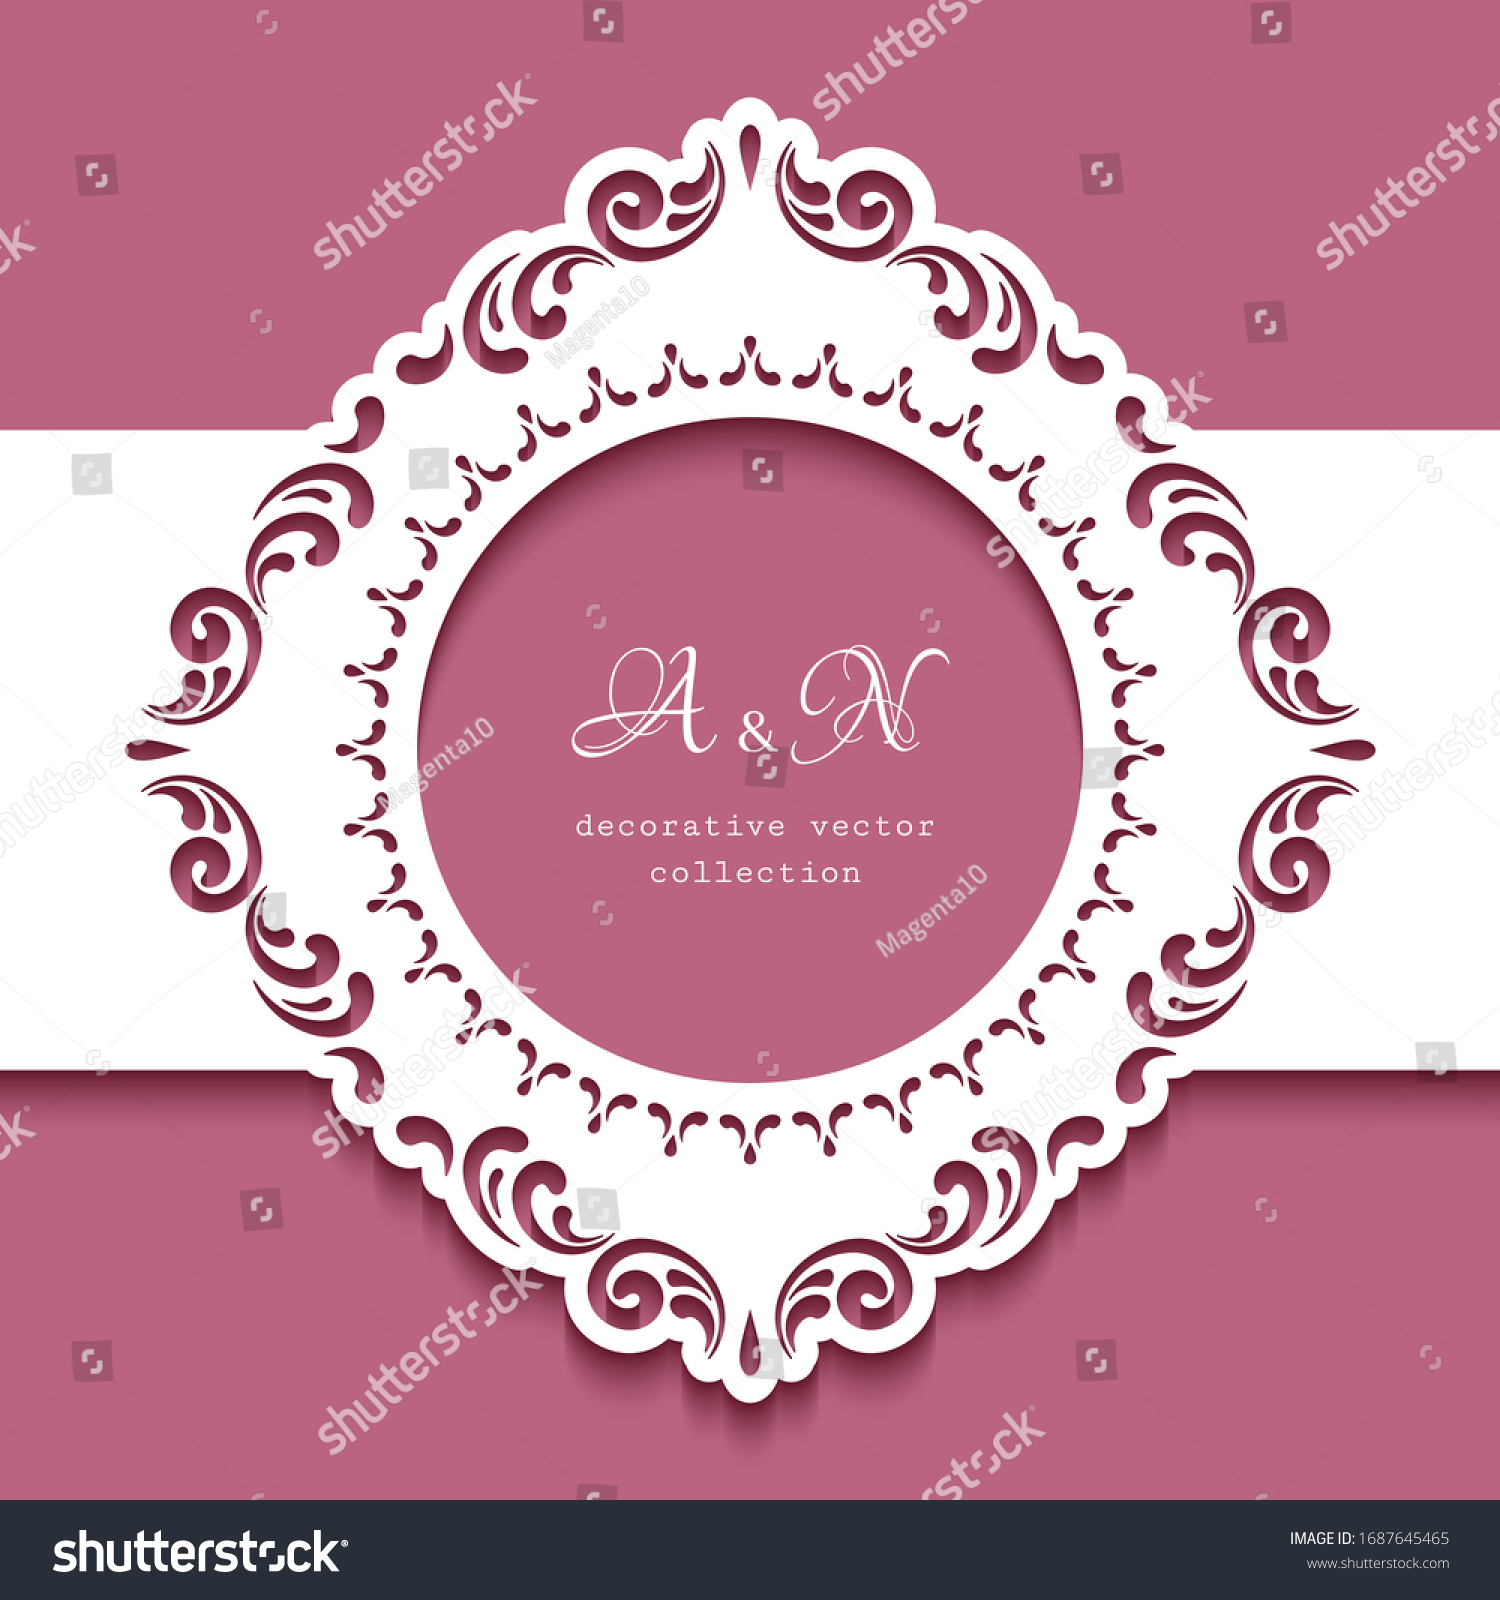 SVG of Cutout paper frame with swirly lace border. Belly band decoration. Vintage vector template for laser cutting or plotter printing. Elegant ornament for wedding invitation card design. Place for text svg